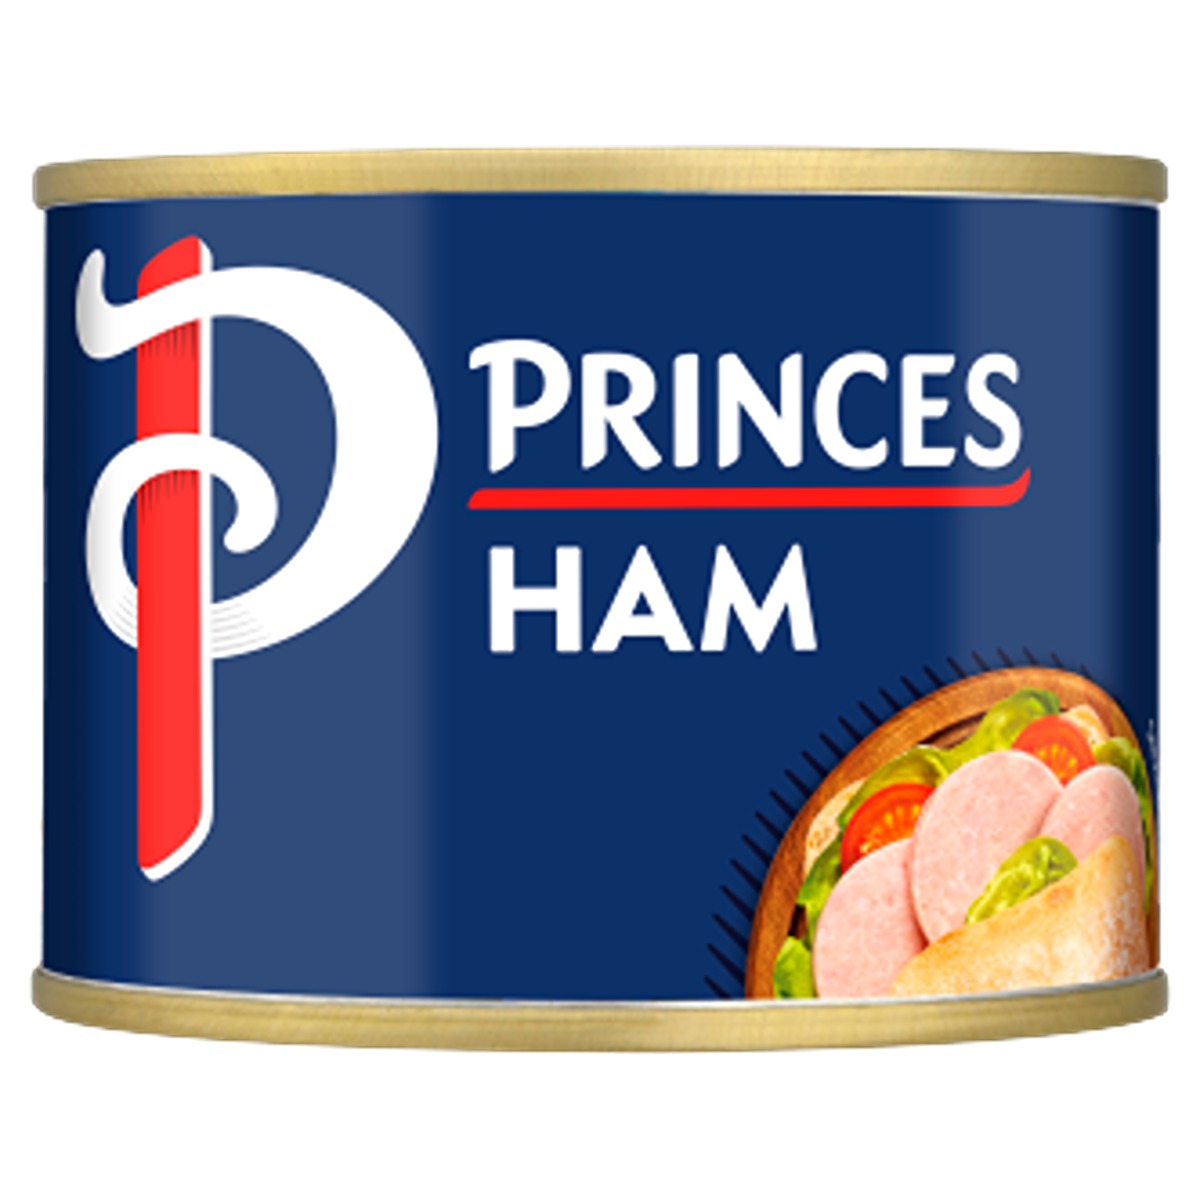 A can of Princes ham on a white background.